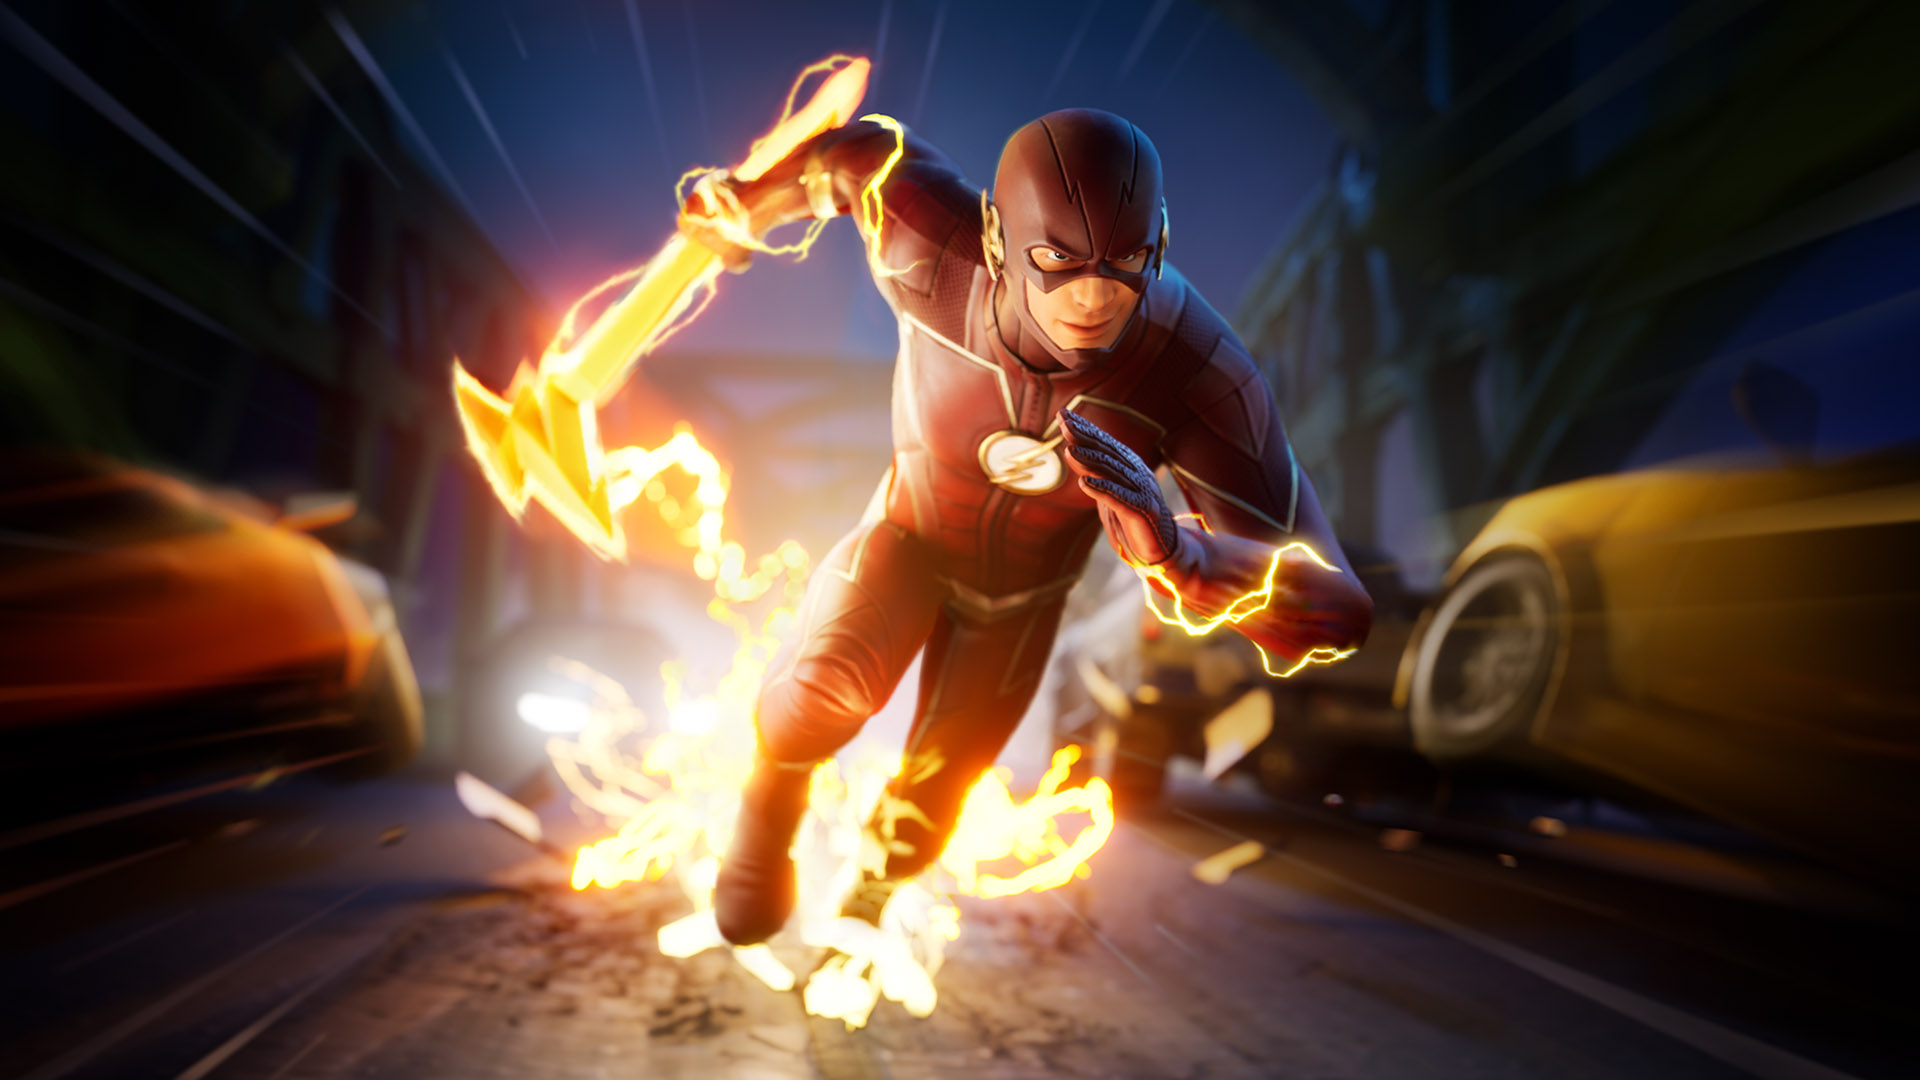 19x1080 The Flash 4k Fortnite 1080p Laptop Full Hd Wallpaper Hd Games 4k Wallpapers Images Photos And Background Wallpapers Den